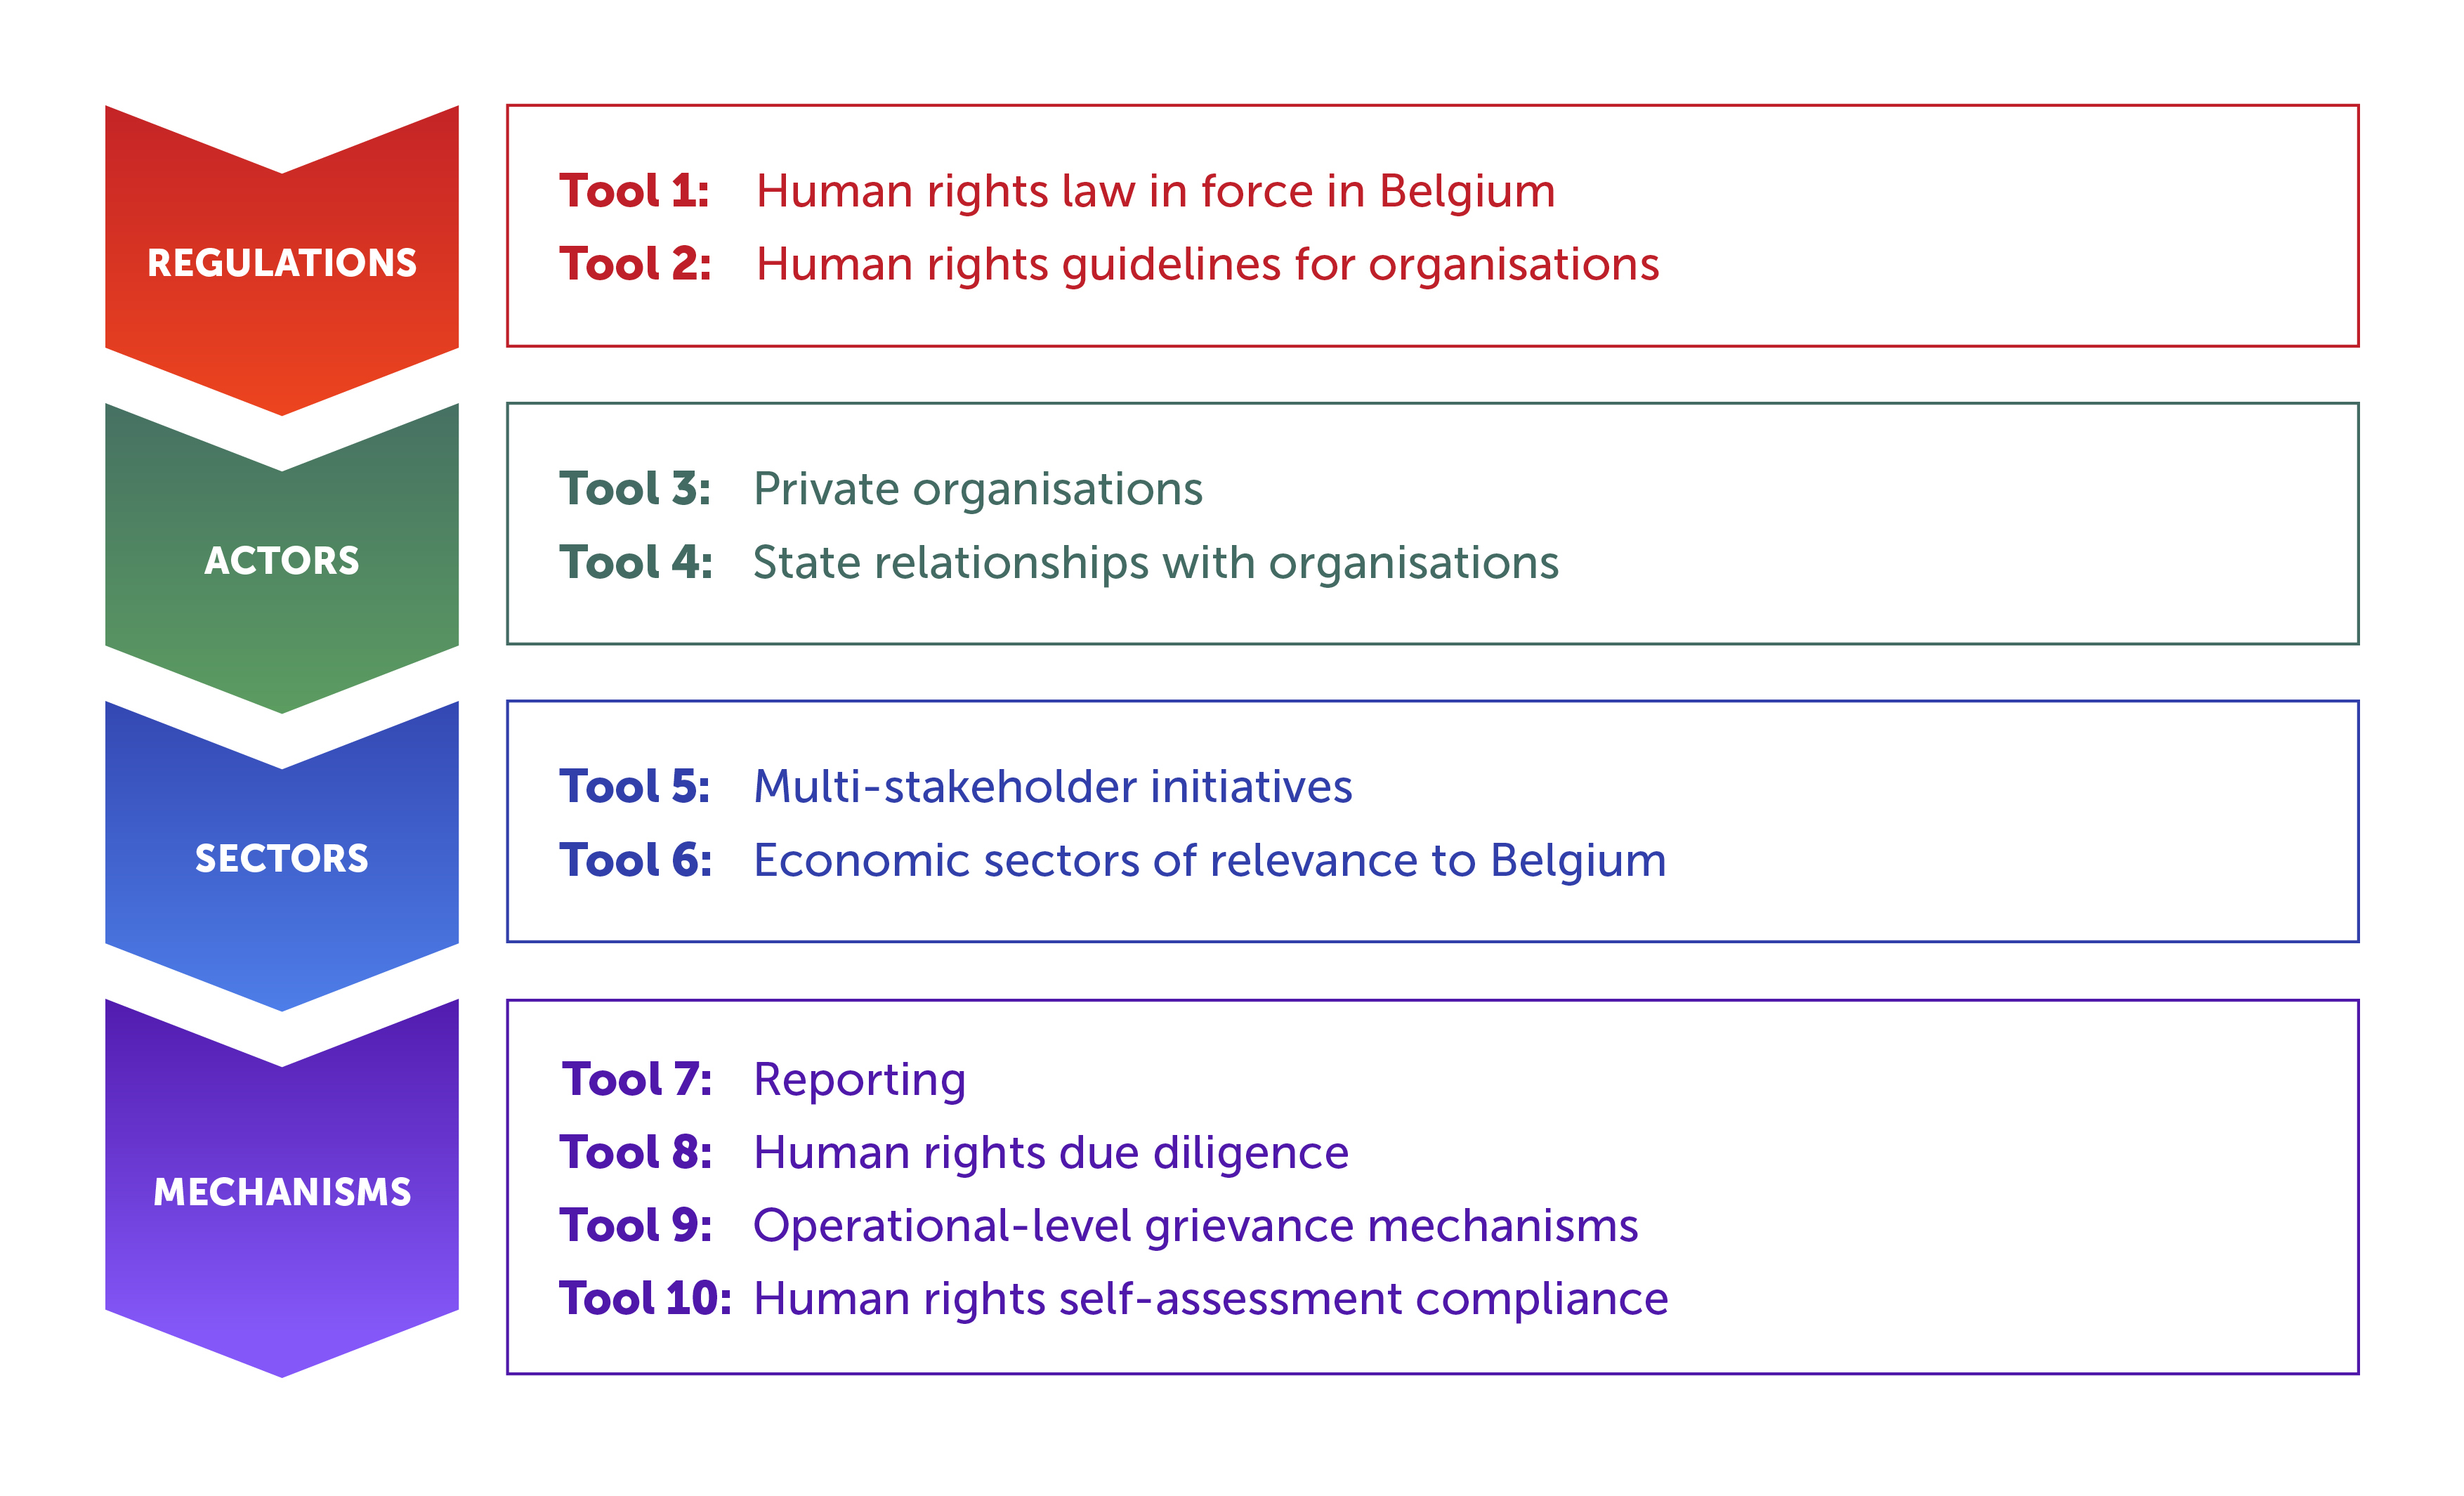 The toolbox is further organised into four groups: Regulations (tools one and two), Actors (tools three and four), Sectors (tools five and six), and Mechanisms (tools seven, eight, nine and ten). Their specific content is explained in the following graphics.